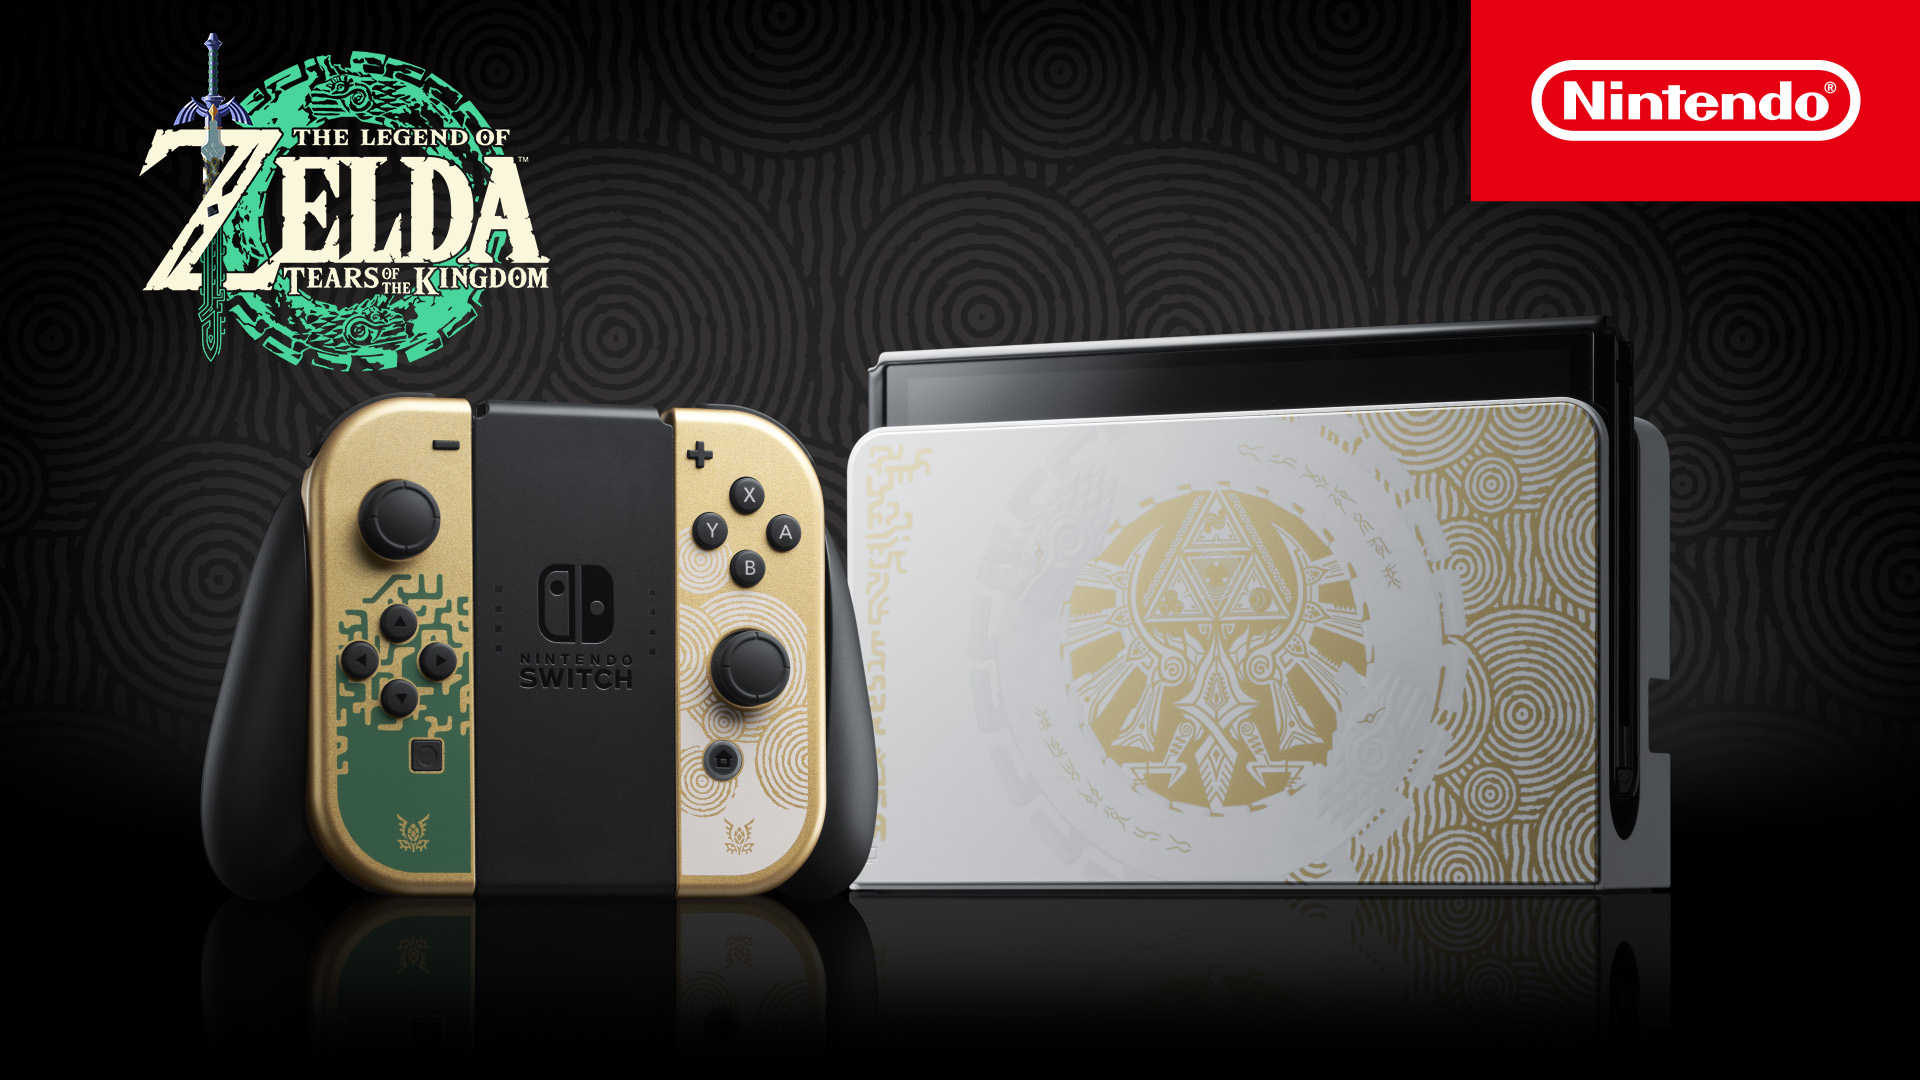 Wire Nintendo Kingdom 28 – | on - Zelda: Edition Nintendo Tears Switch of News: The Legend Model the April OLED Launches Business of